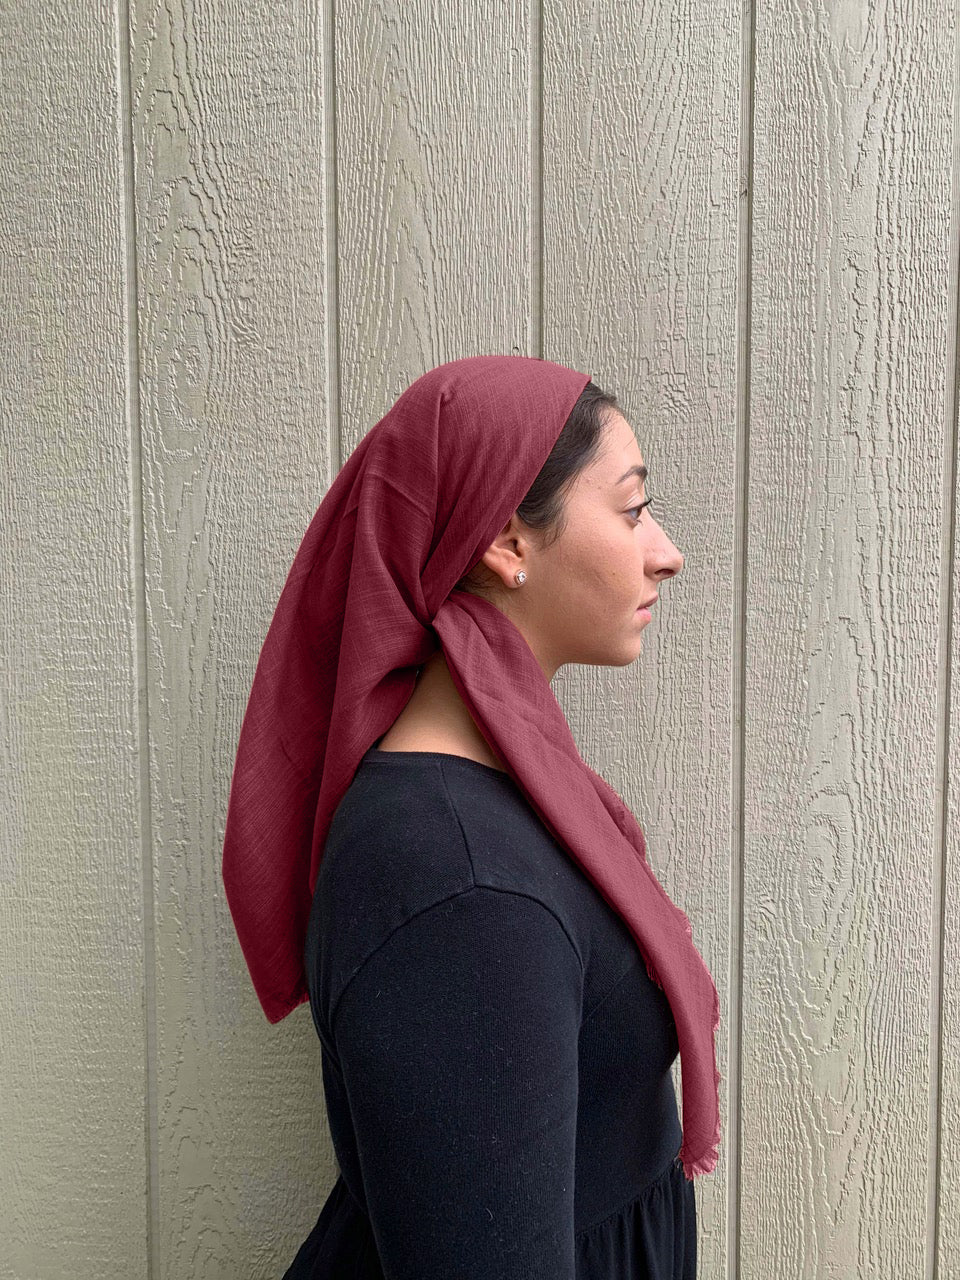 Muted Berry Headscarf